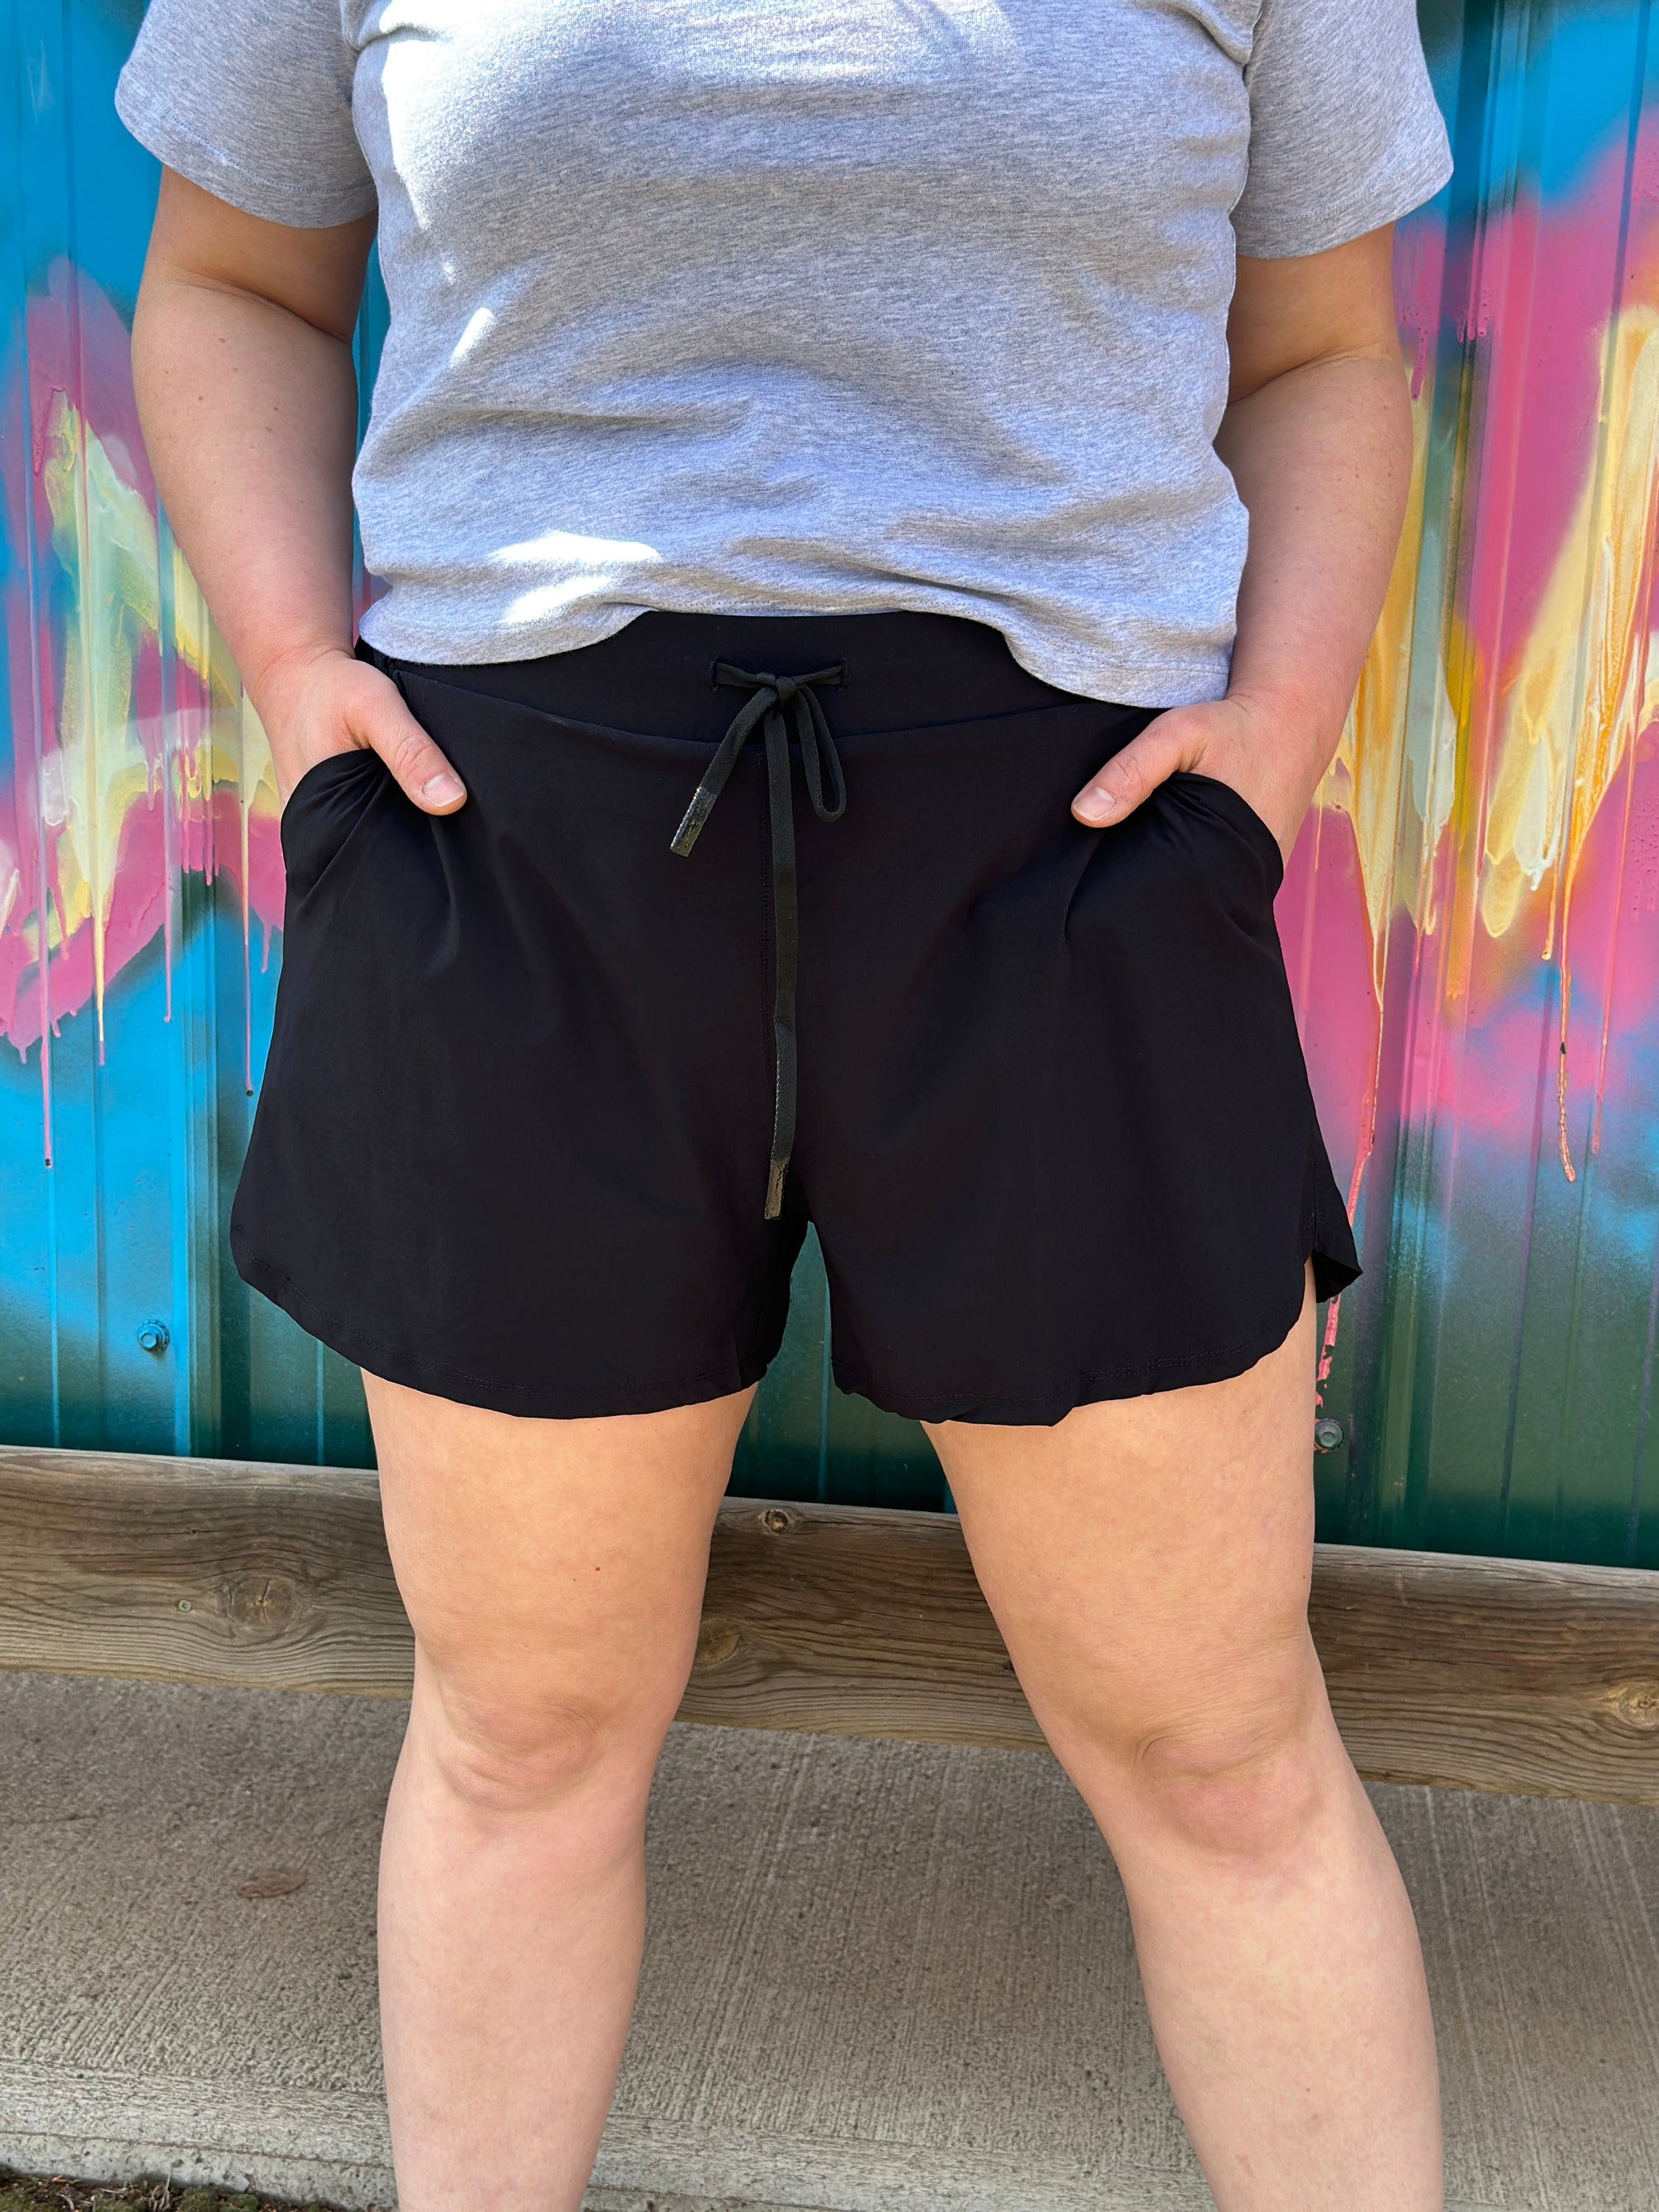 Ball Park Athletic short with spandex short lining (Small - 3X)